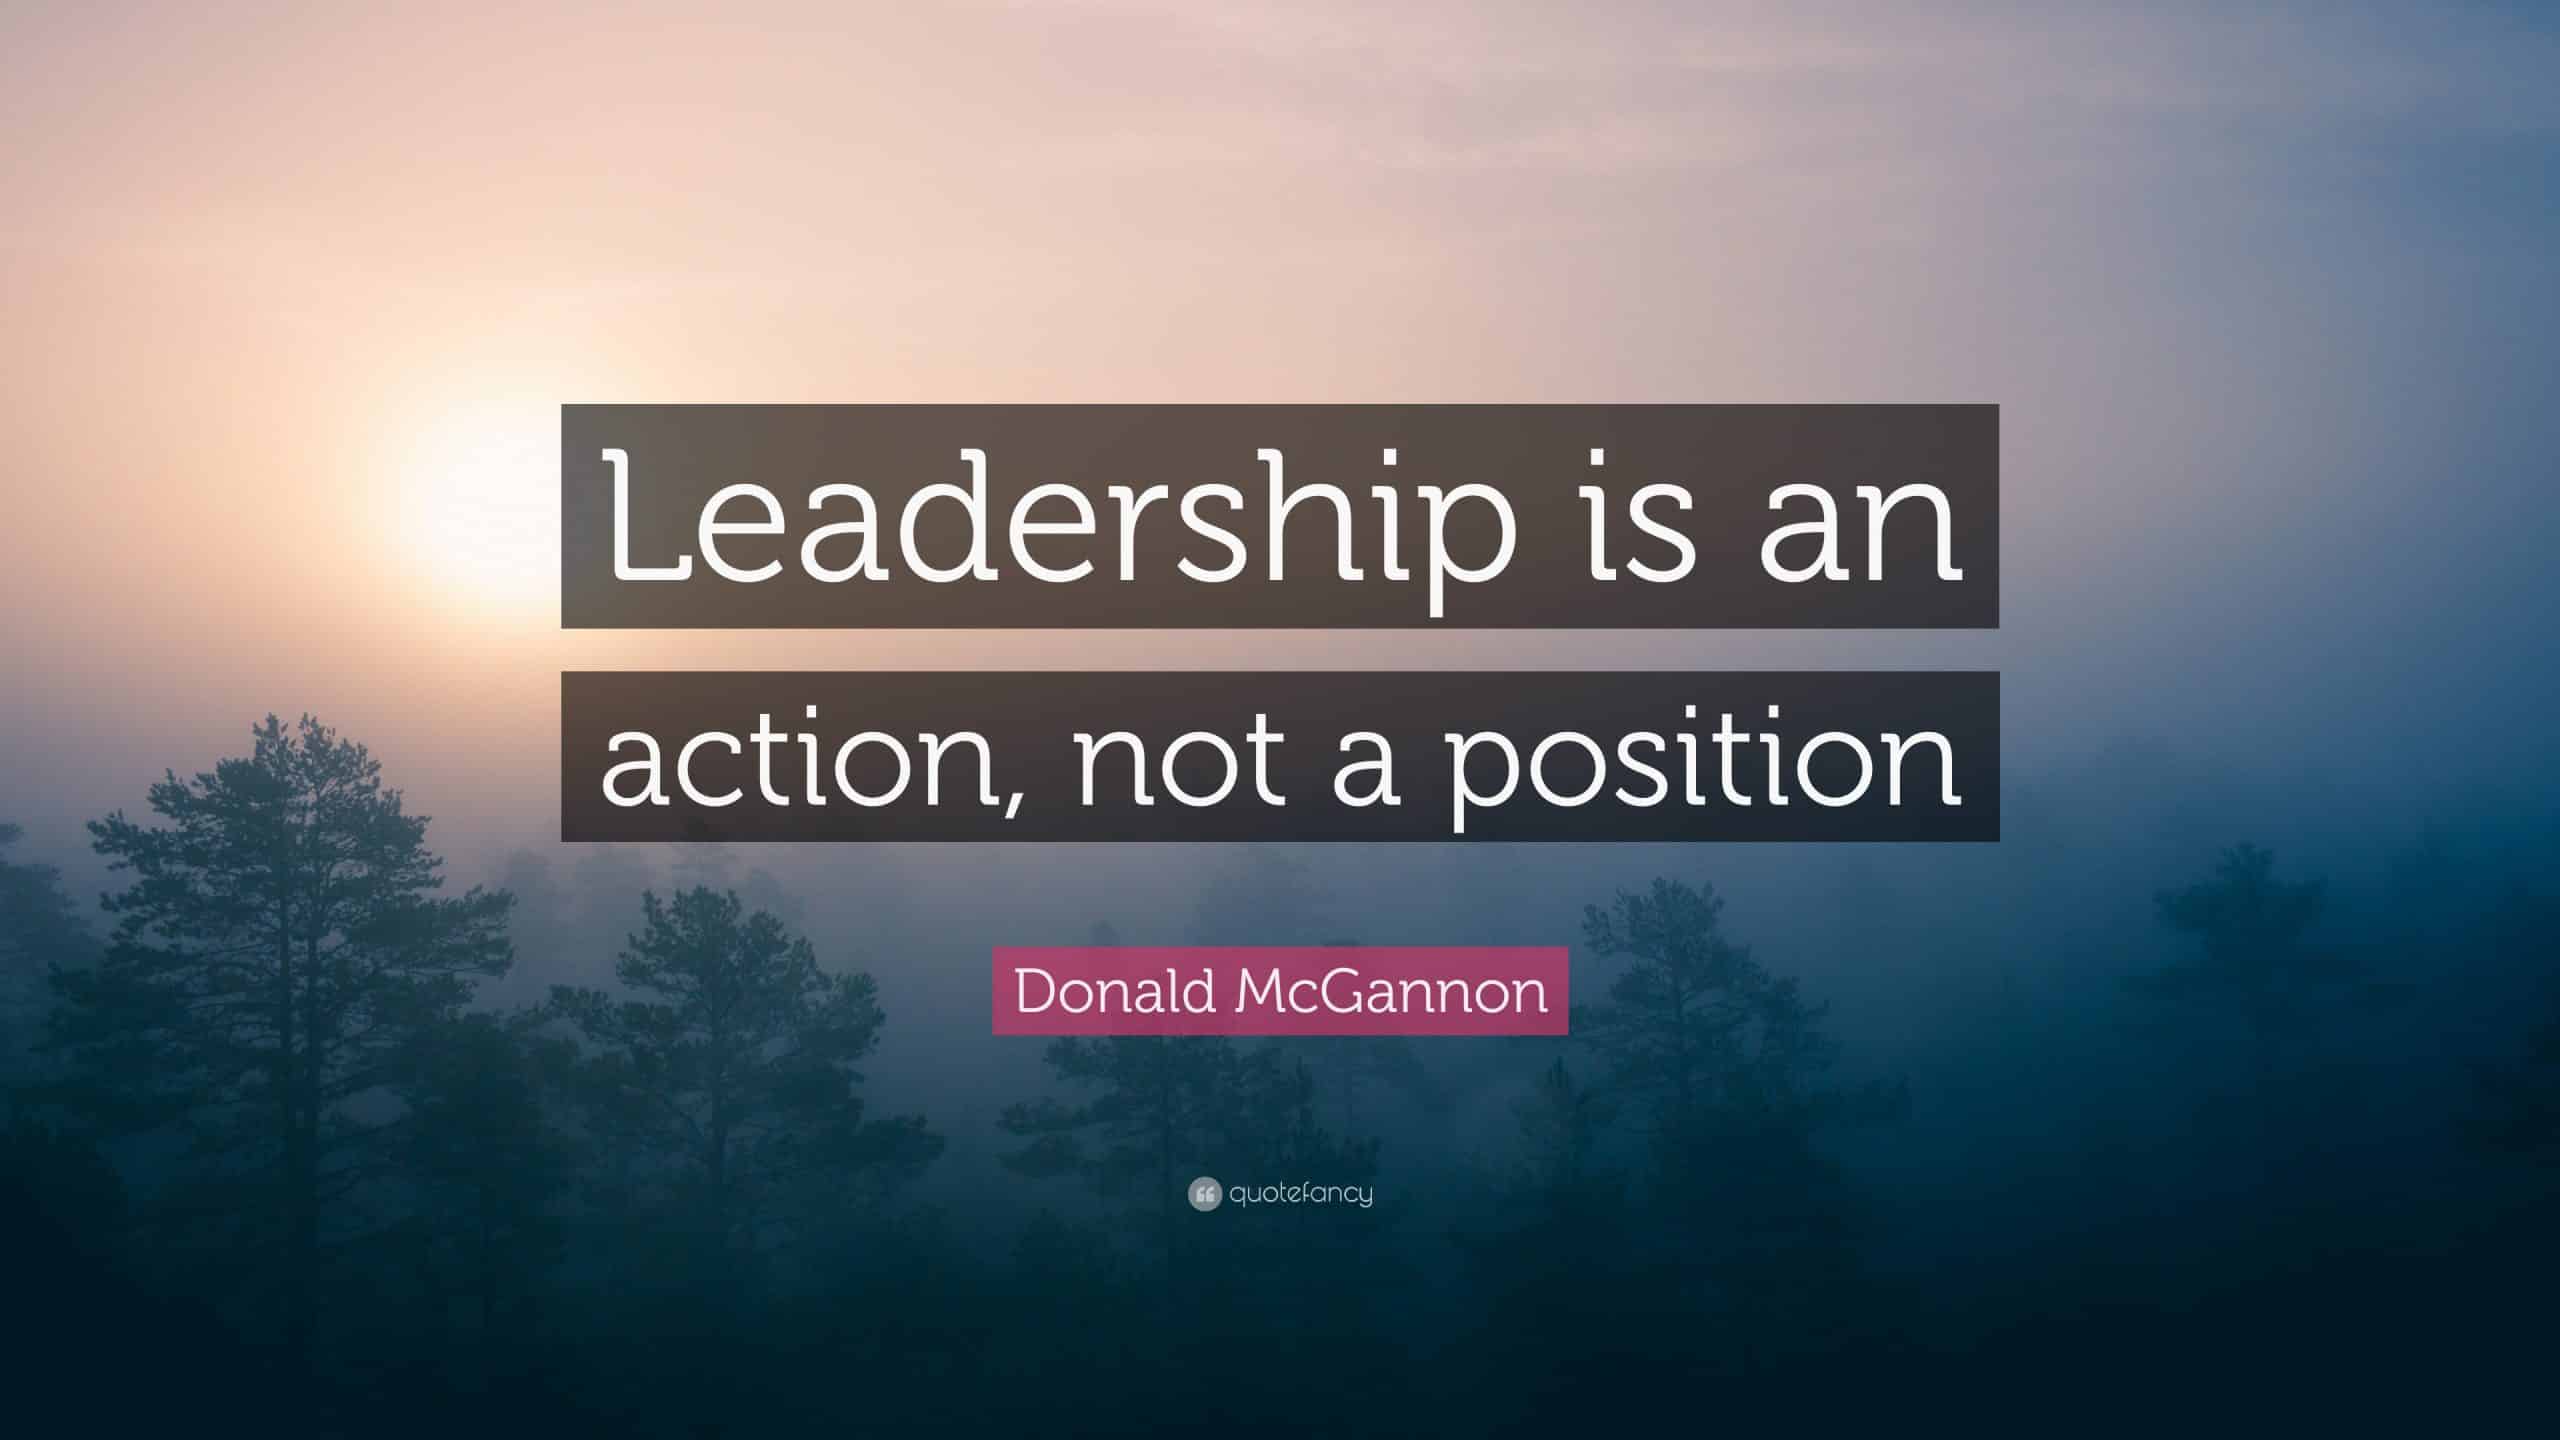 Do you want to be a great leader?